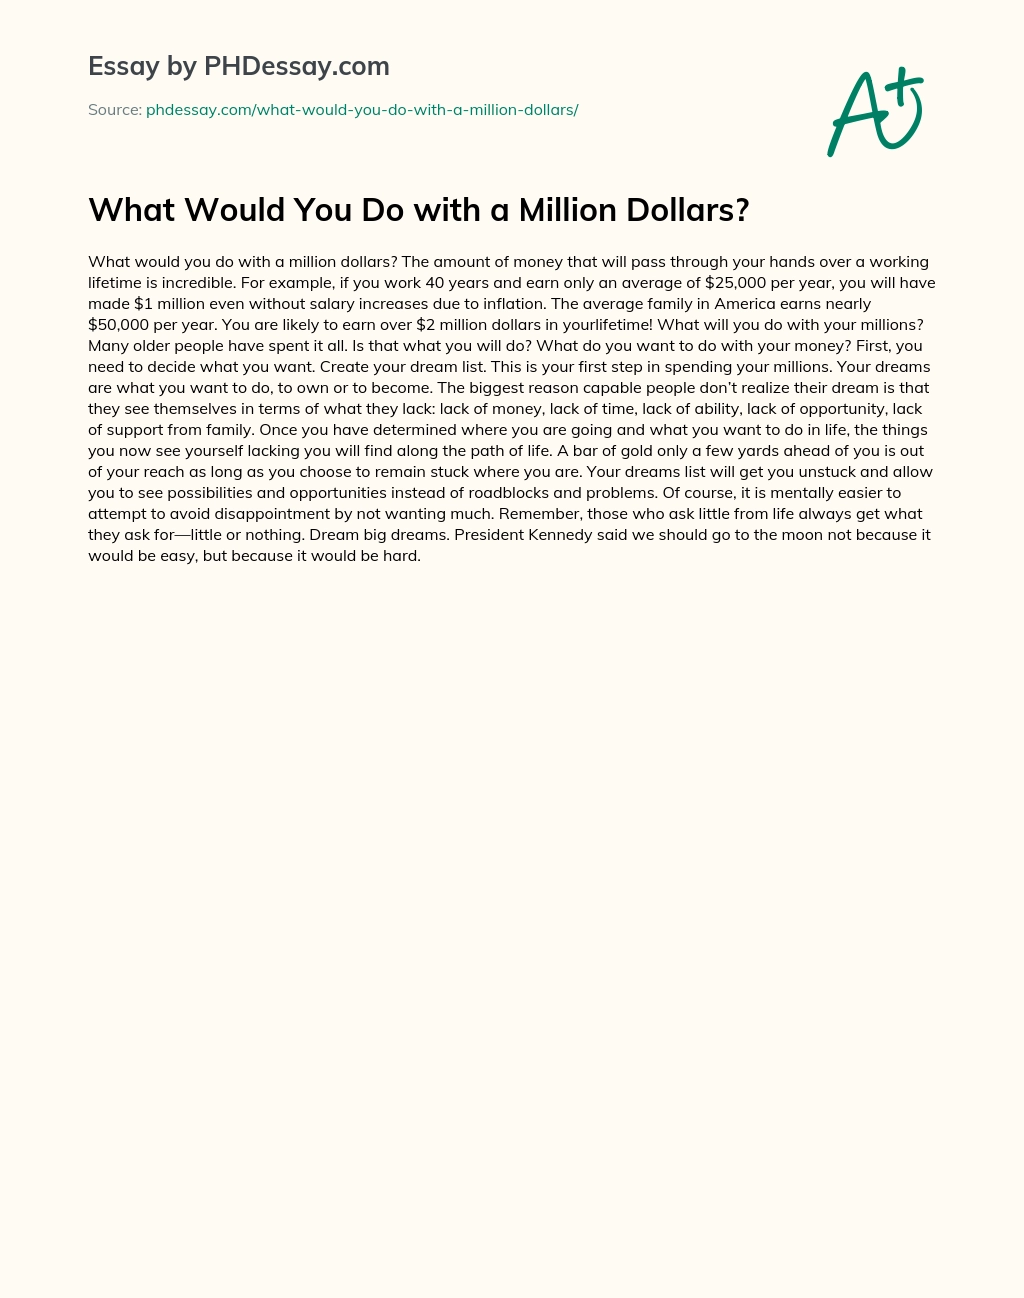 What Would You Do with a Million Dollars? essay